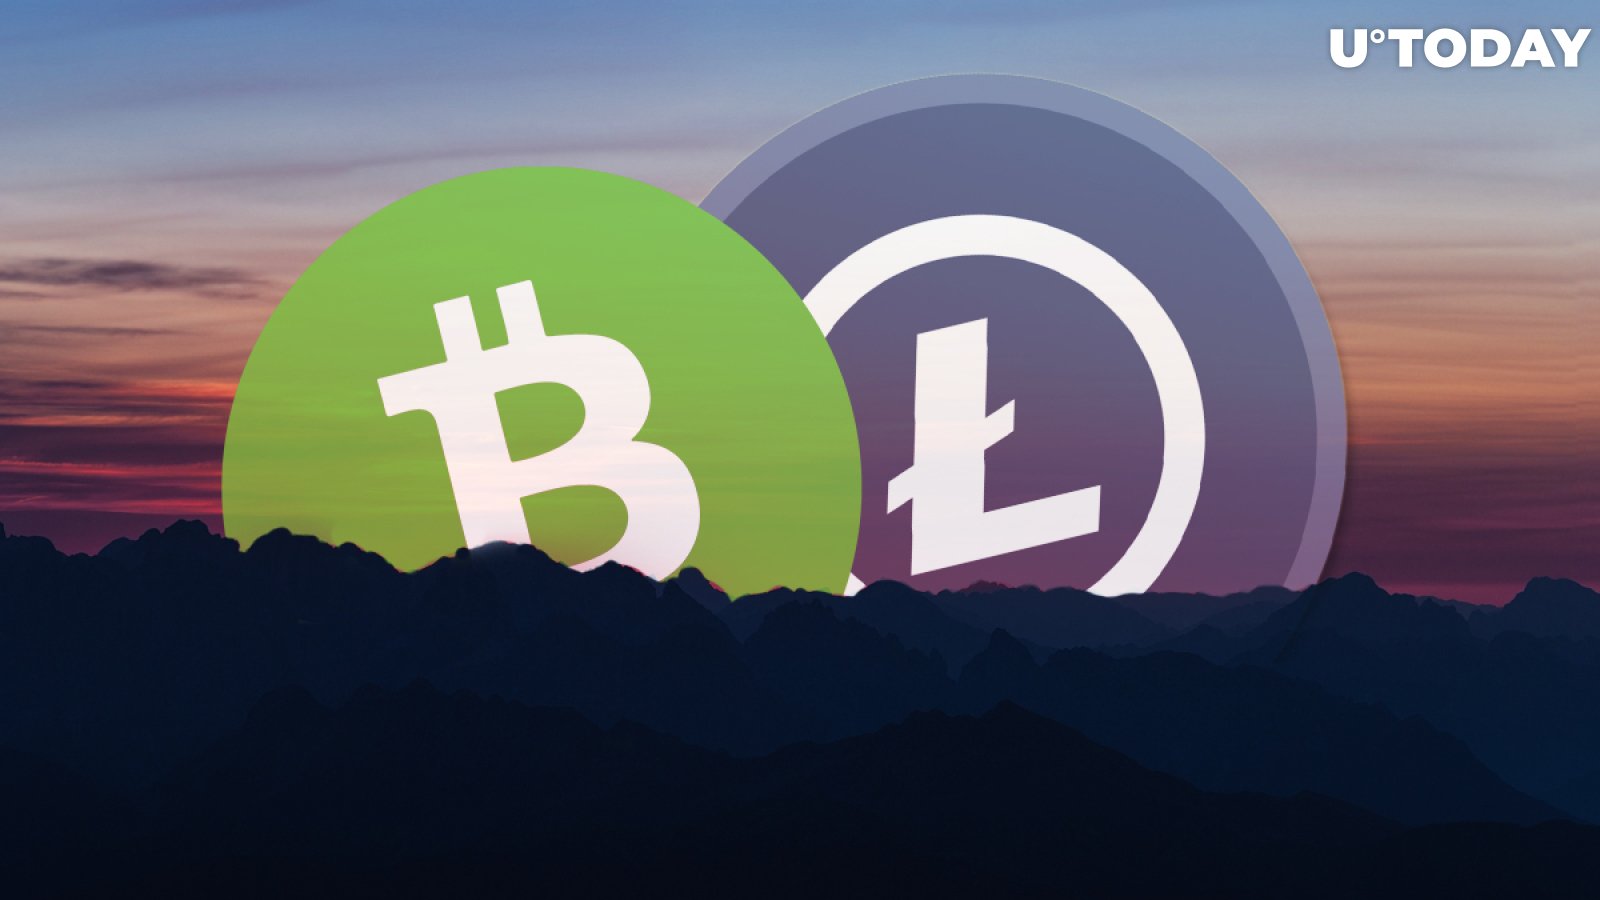 Bitcoin Cash (BCH) and Litecoin (LTC) Kick Off the Week on a Bullish Note. Will Other Top Coins Follow Suit?